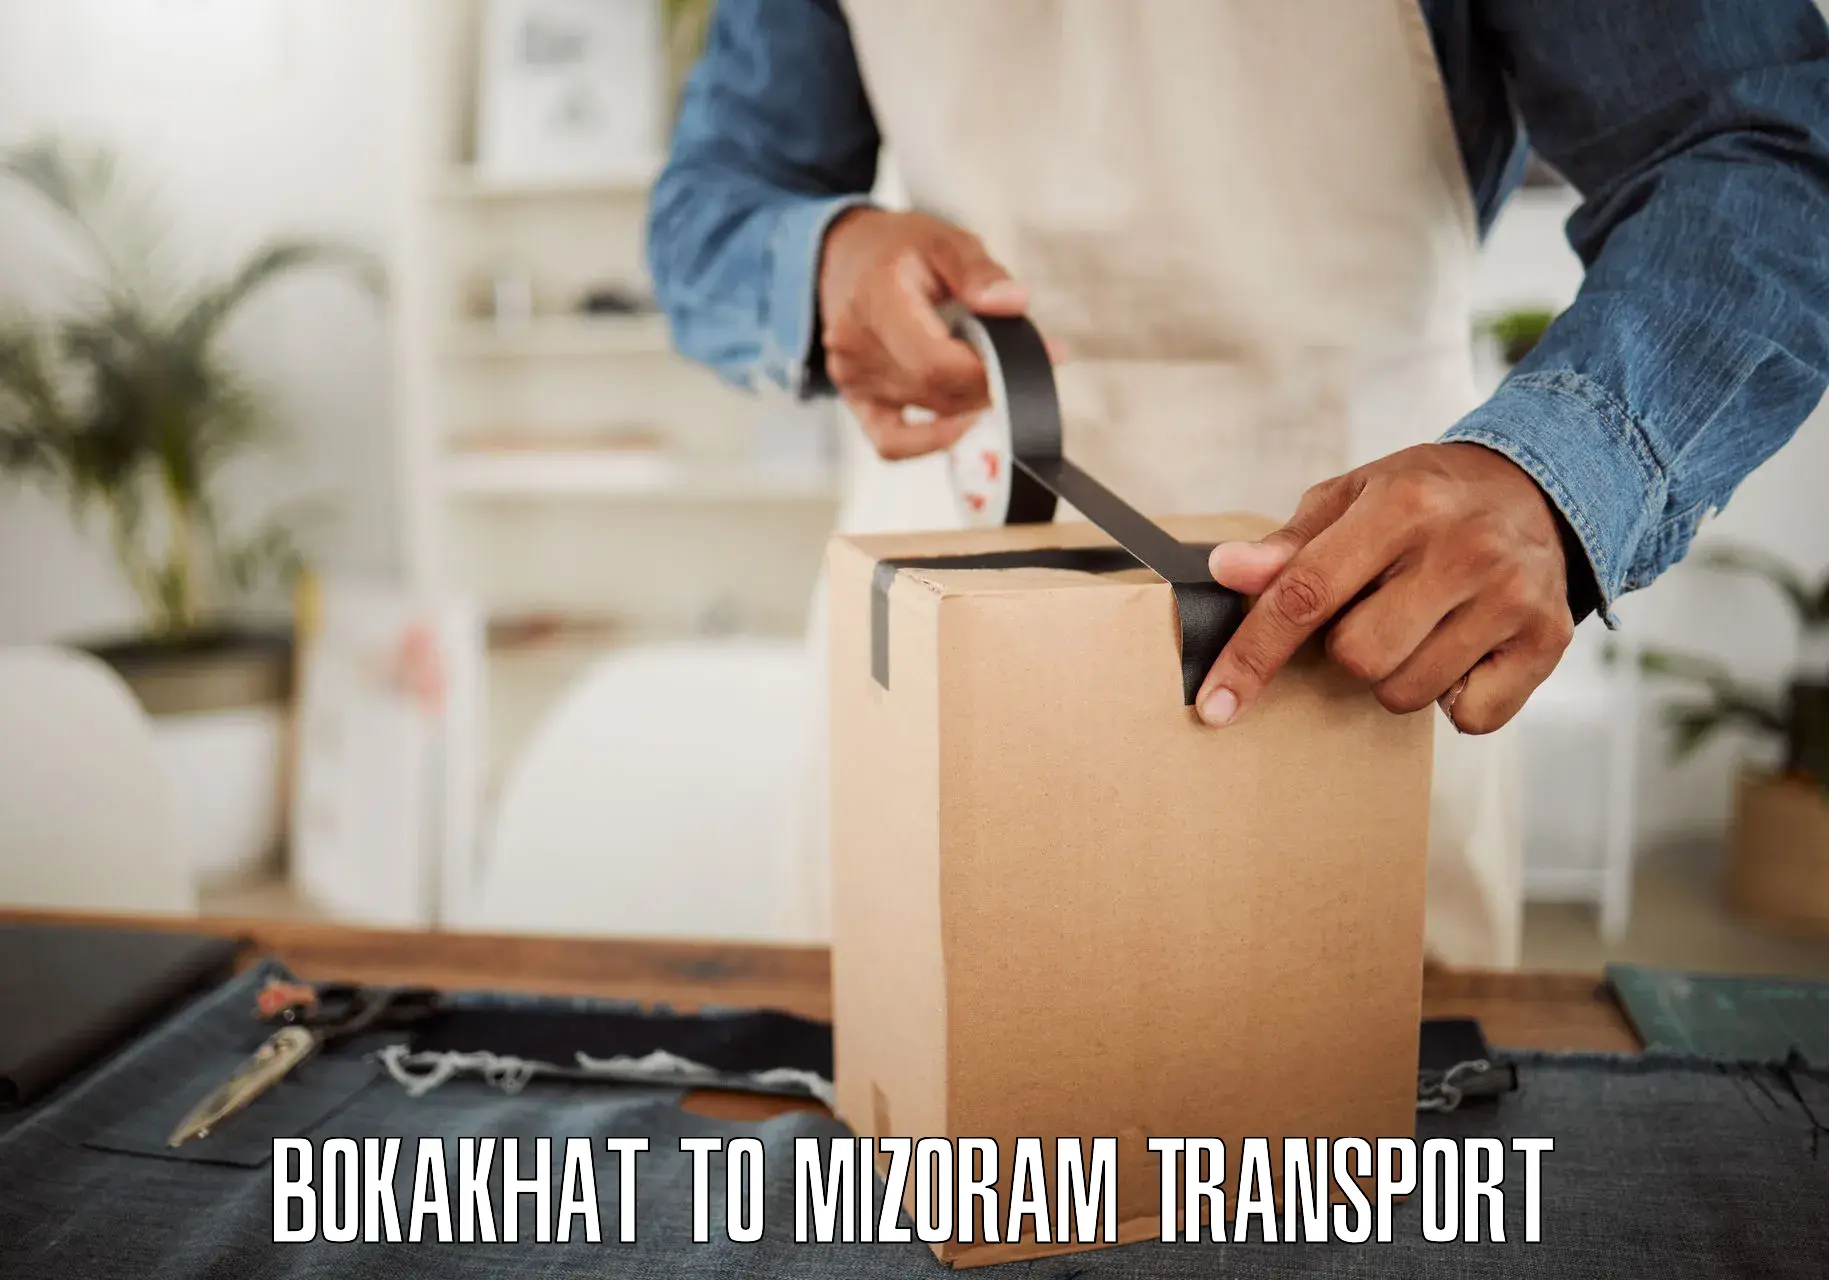 Transport bike from one state to another Bokakhat to Mizoram